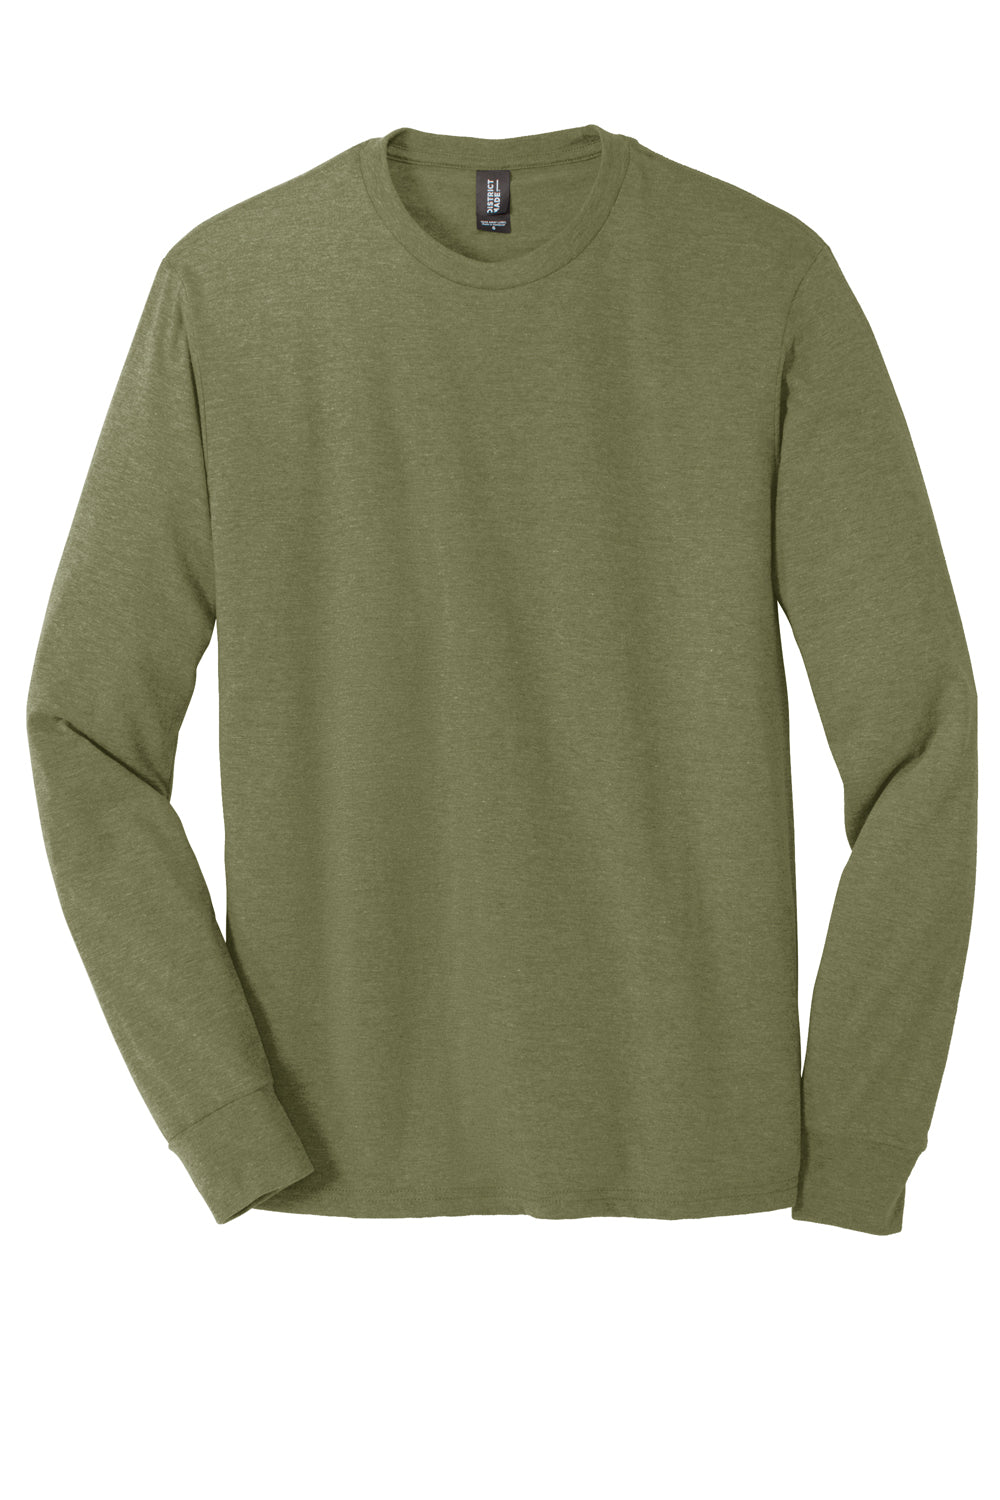 District DM132 Mens Perfect Tri Long Sleeve Crewneck T-Shirt Military Green Frost Flat Front